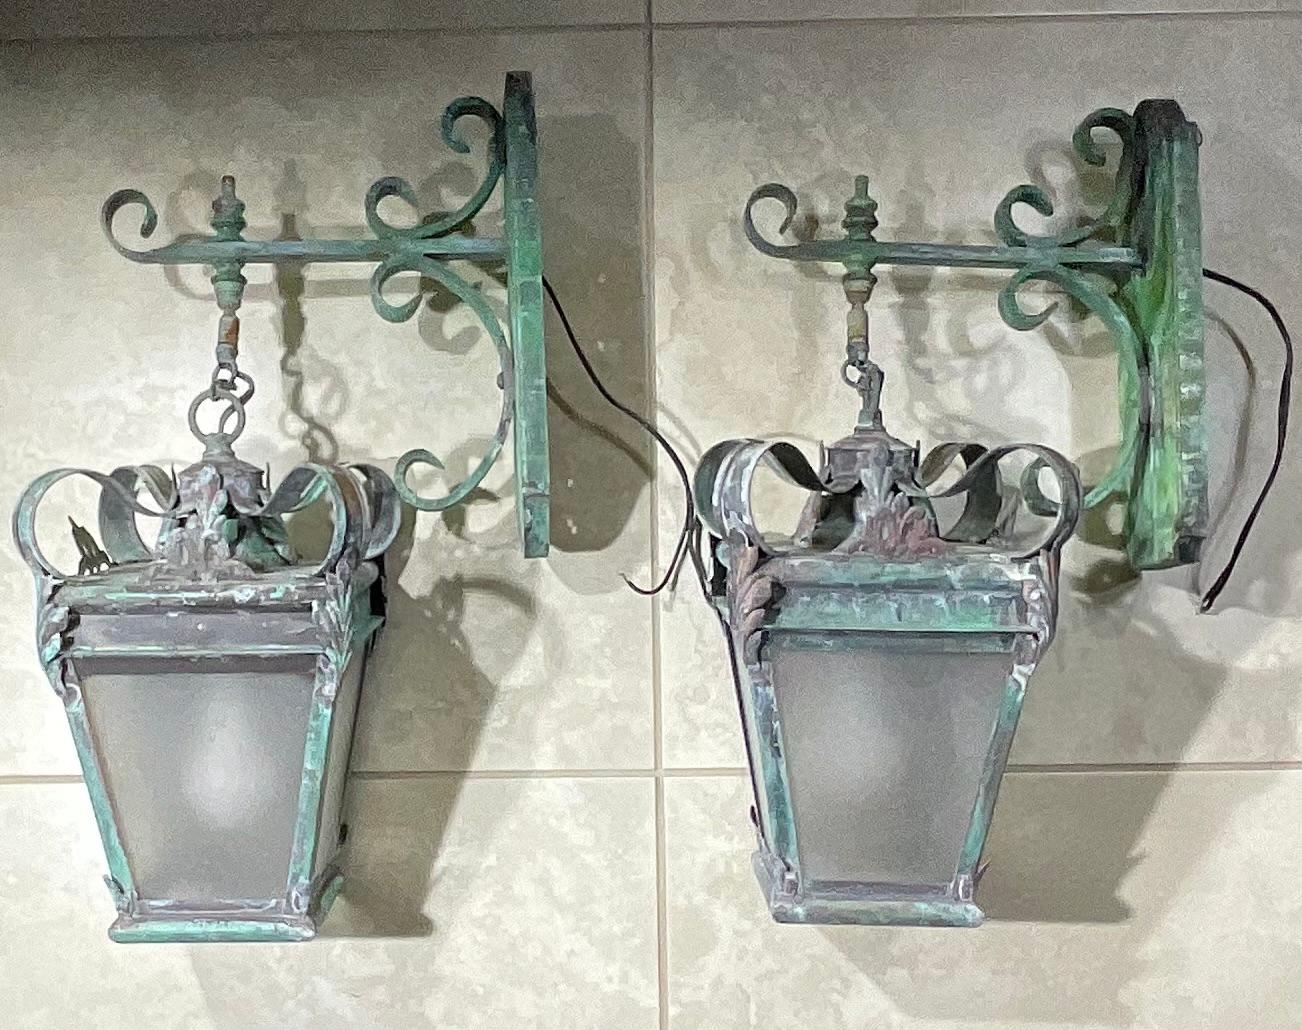 Beautiful pair of wall lantern made of solid brass and bronze , exceptional quality workmanship, electrified with one 60/watt light each,
Suitable for wet location.
Great patina decorative pair
Backplates are slightly deferent shape on the top see